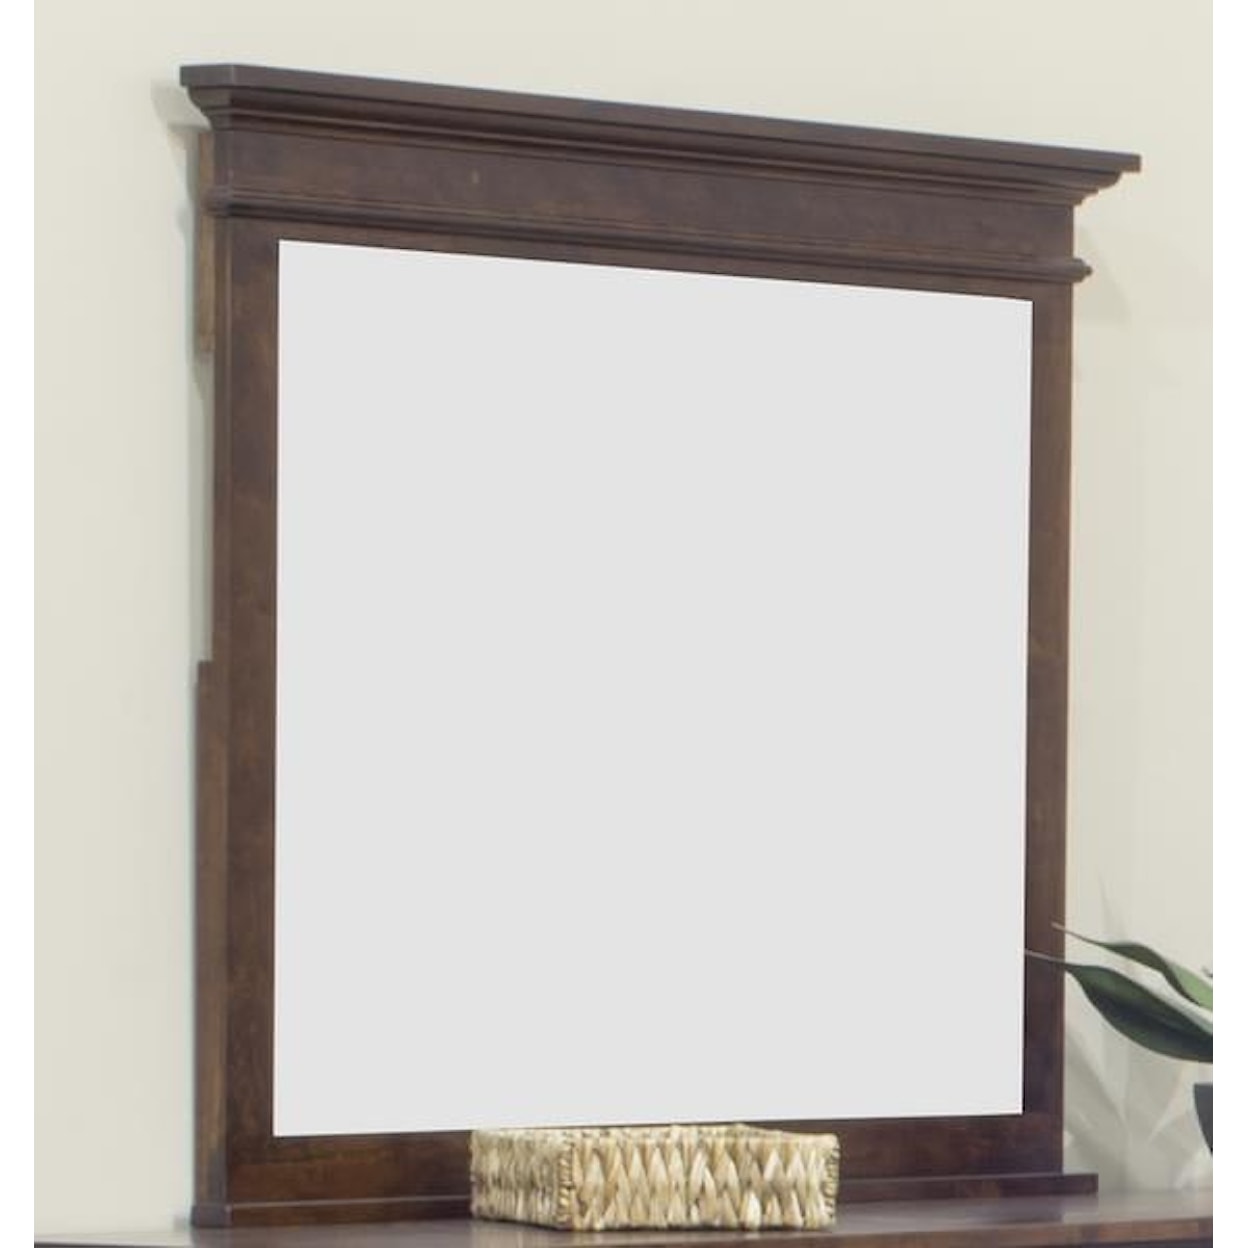 L.J. Gascho Furniture Brentwood Brentwood Mirror